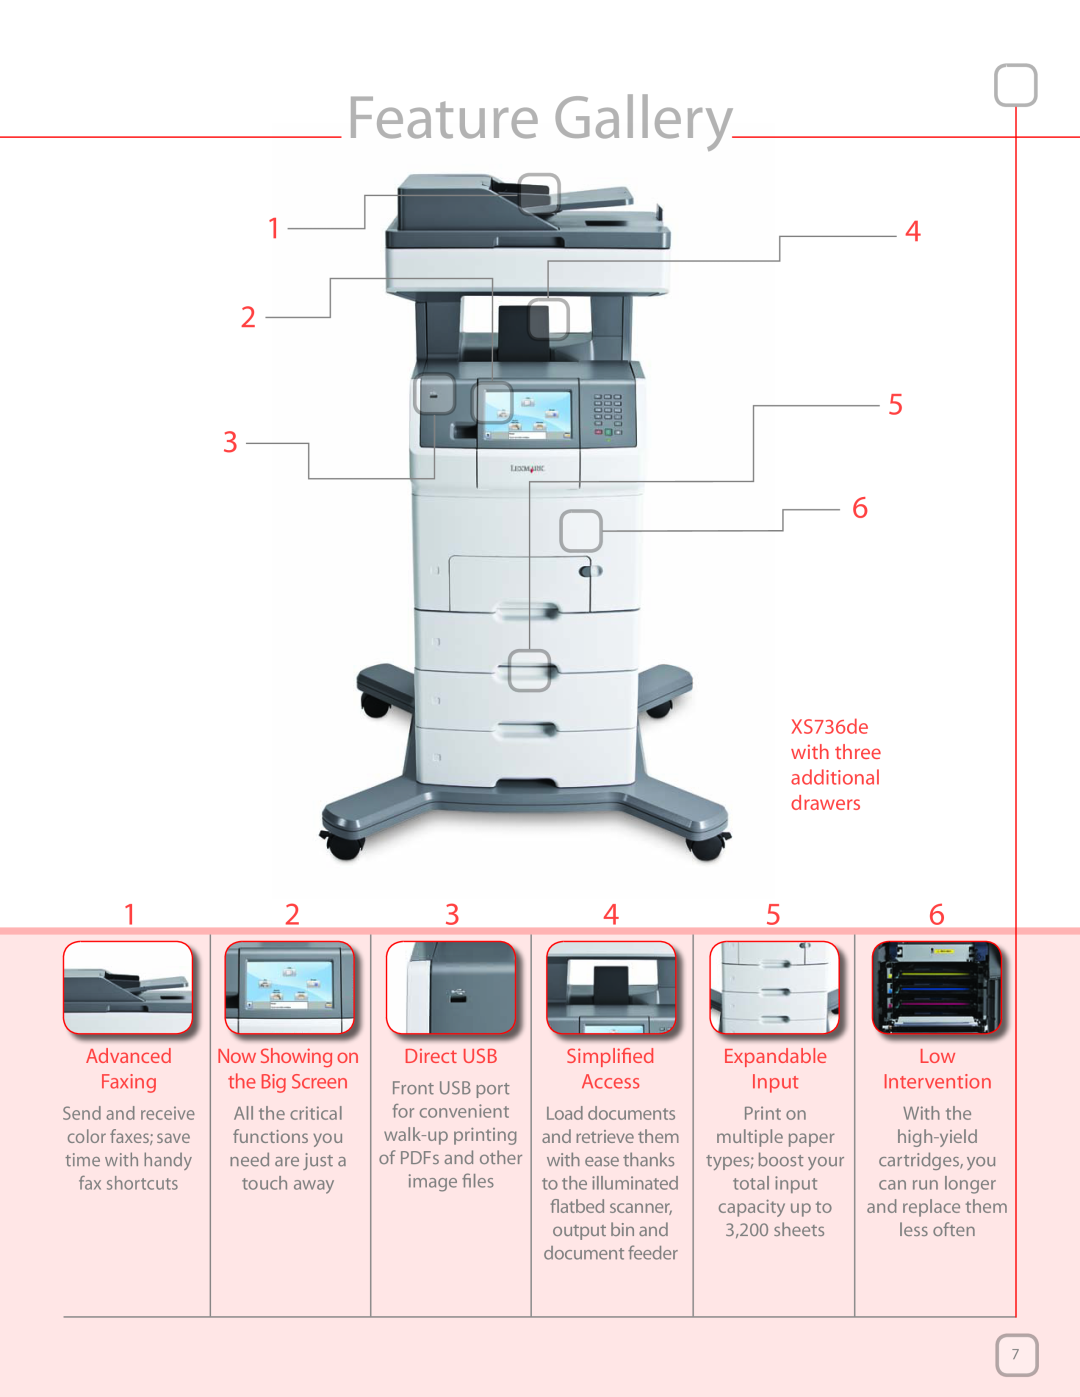 Lexmark XS734de Feature Gallery, XS736de with three additional drawers, Advanced Faxing, Now Showing on the Big Screen 